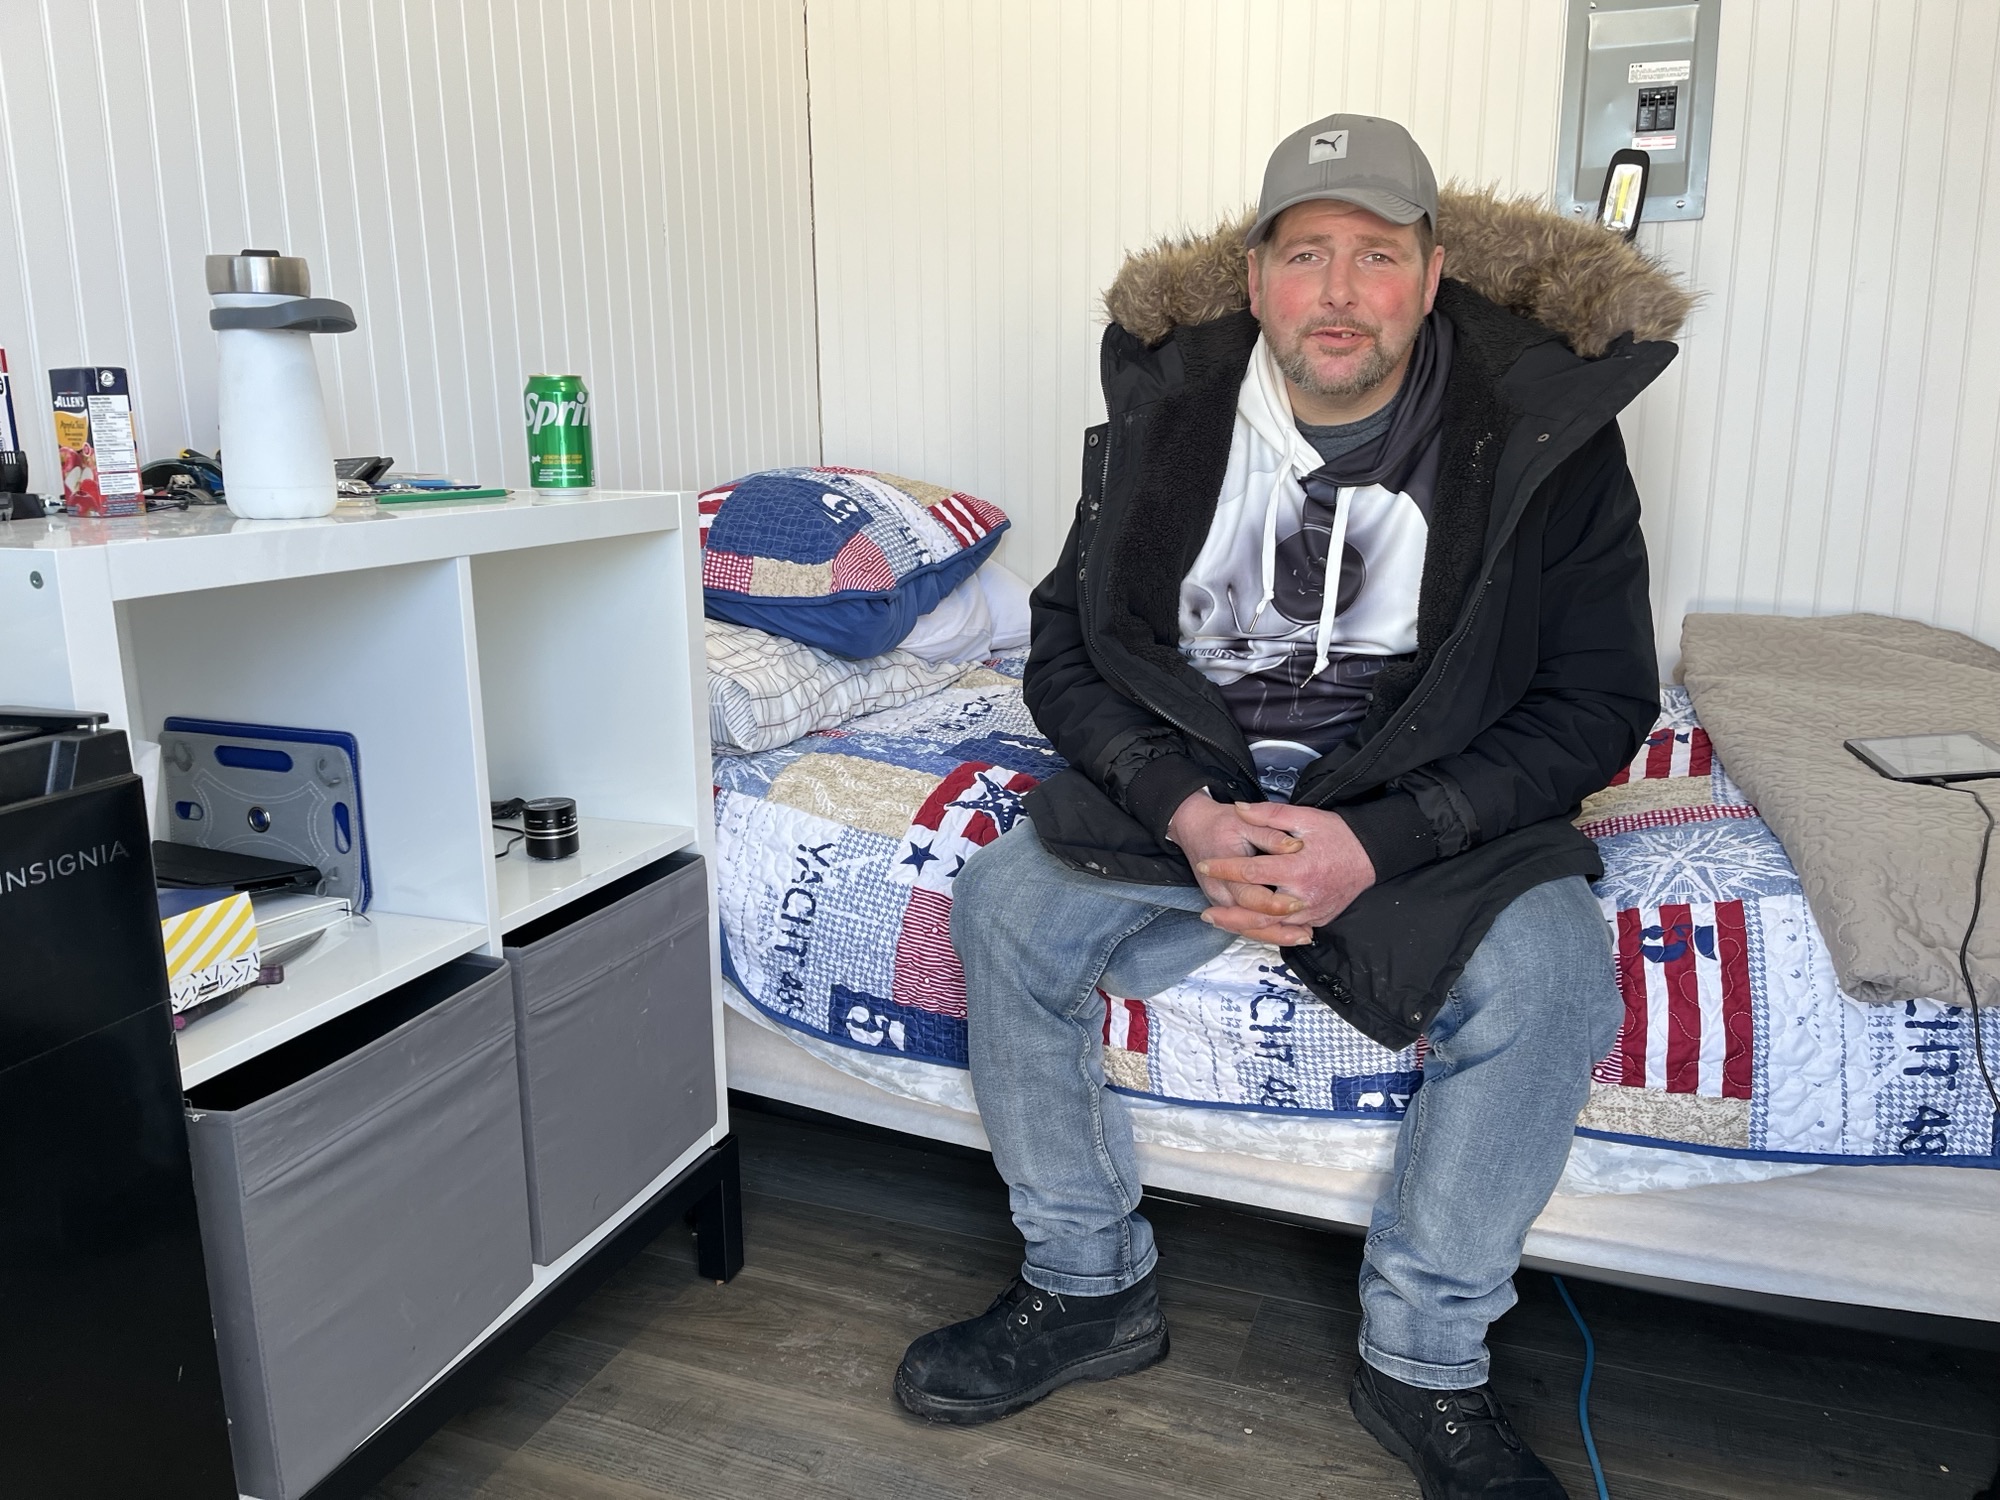 Healing in nature: Rural housing project helps Moncton homeless population